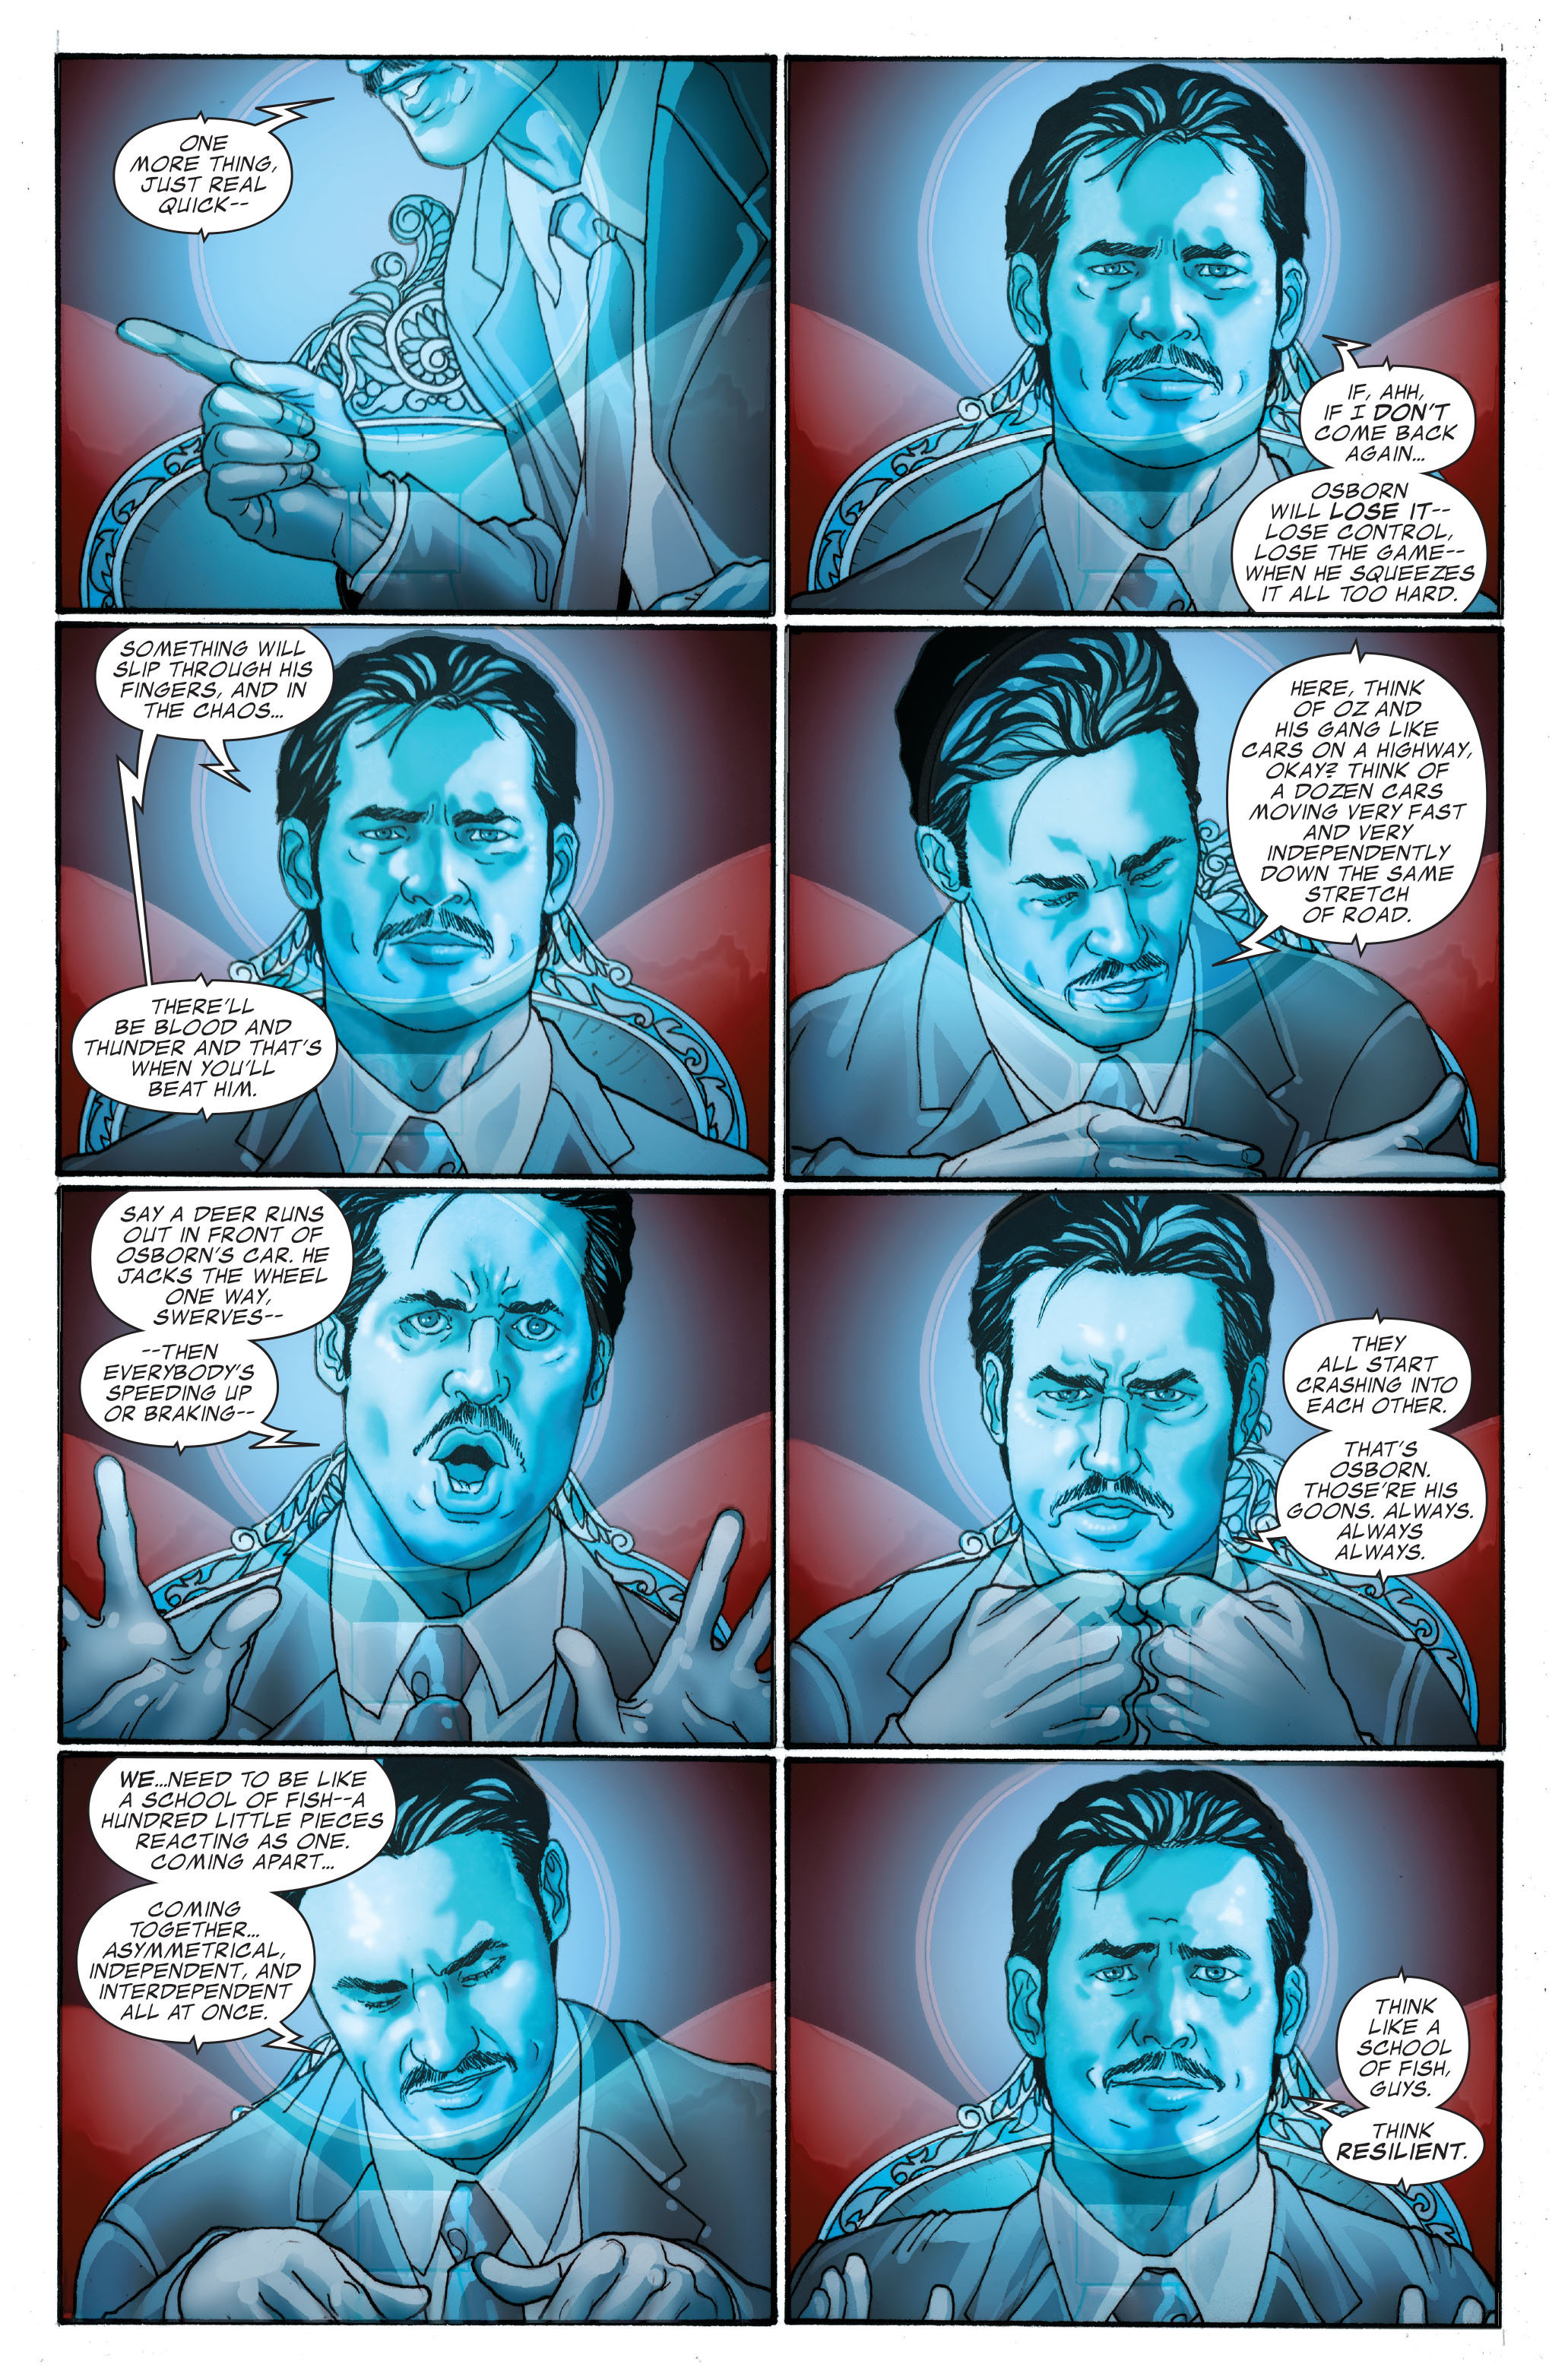 Invincible Iron Man (2008) 20 Page 9